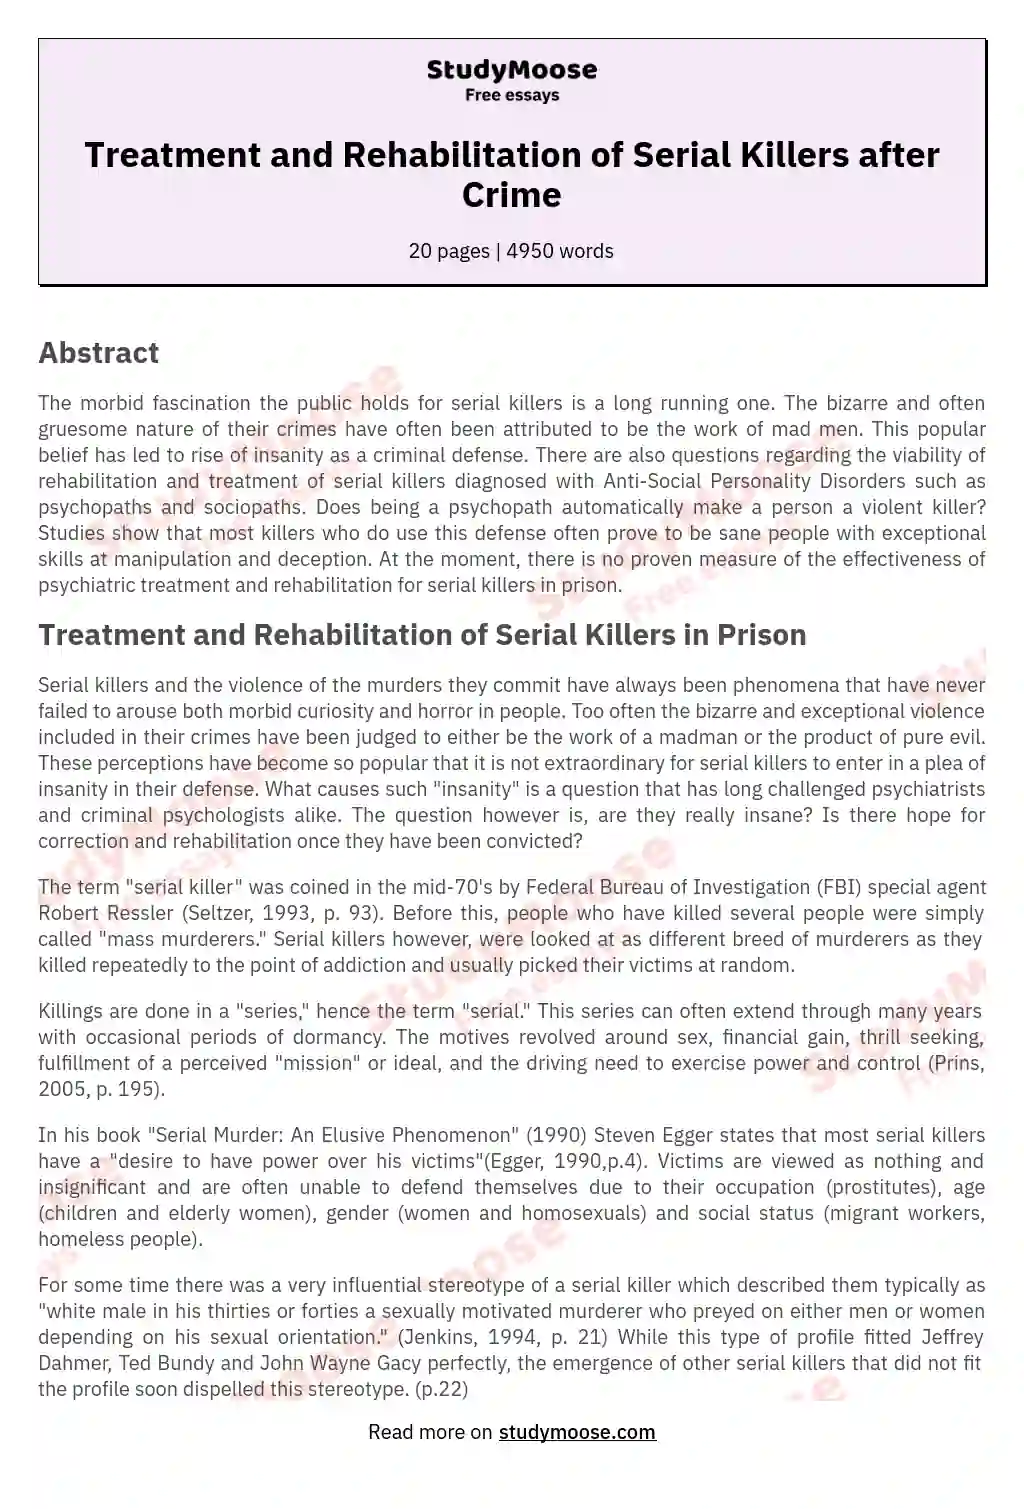 Treatment and Rehabilitation of Serial Killers after Crime